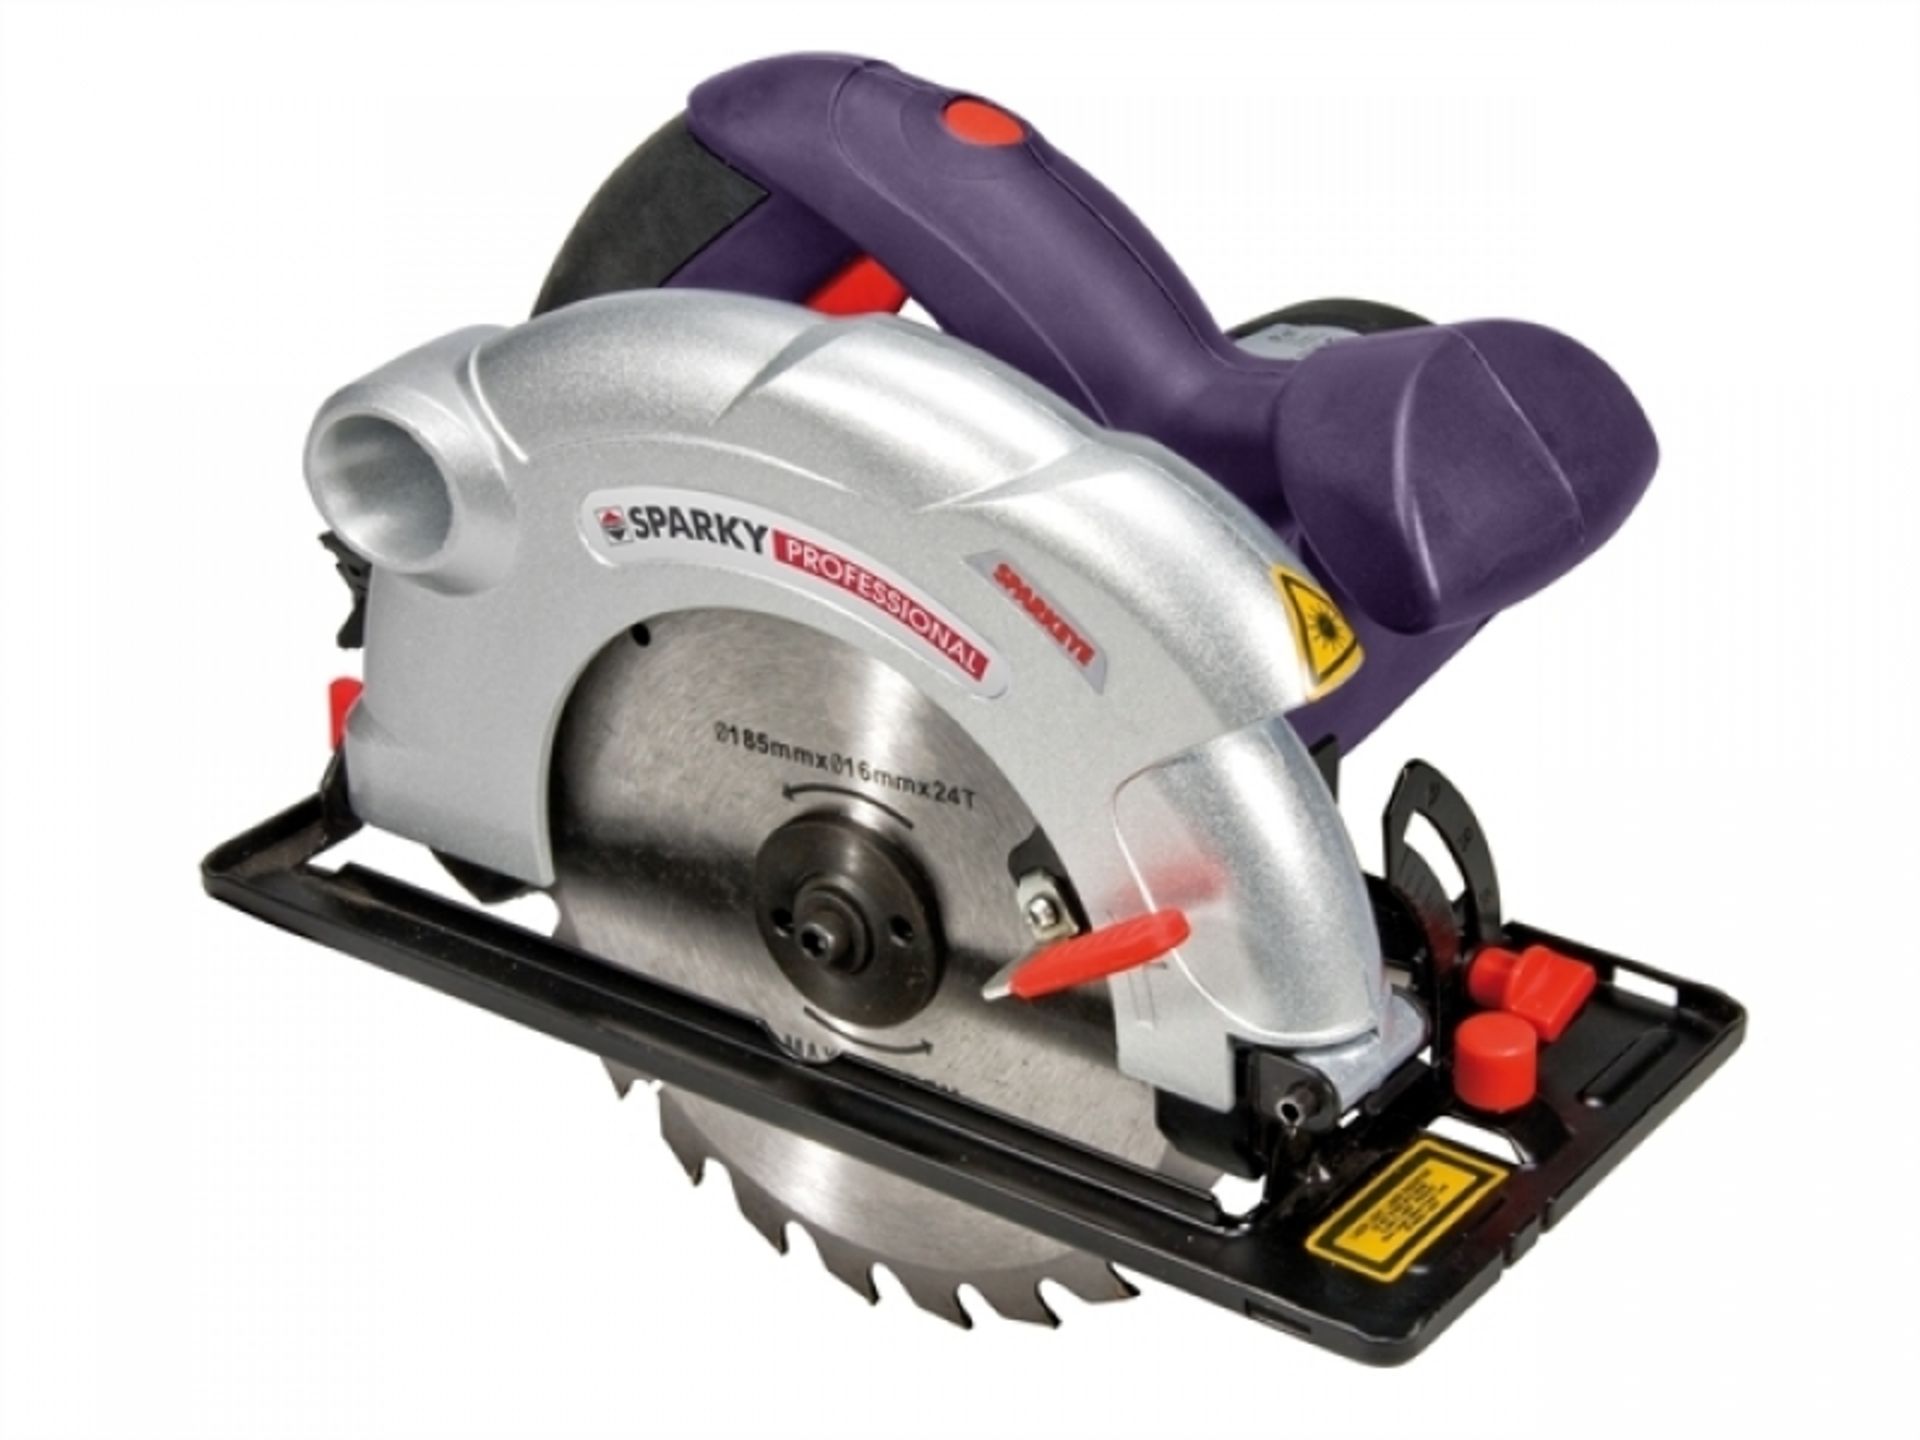 V Brand New Sparky TK65 Professional Circular Saw 110v/1200w With Laser Cutting Guide/Spindle Lock